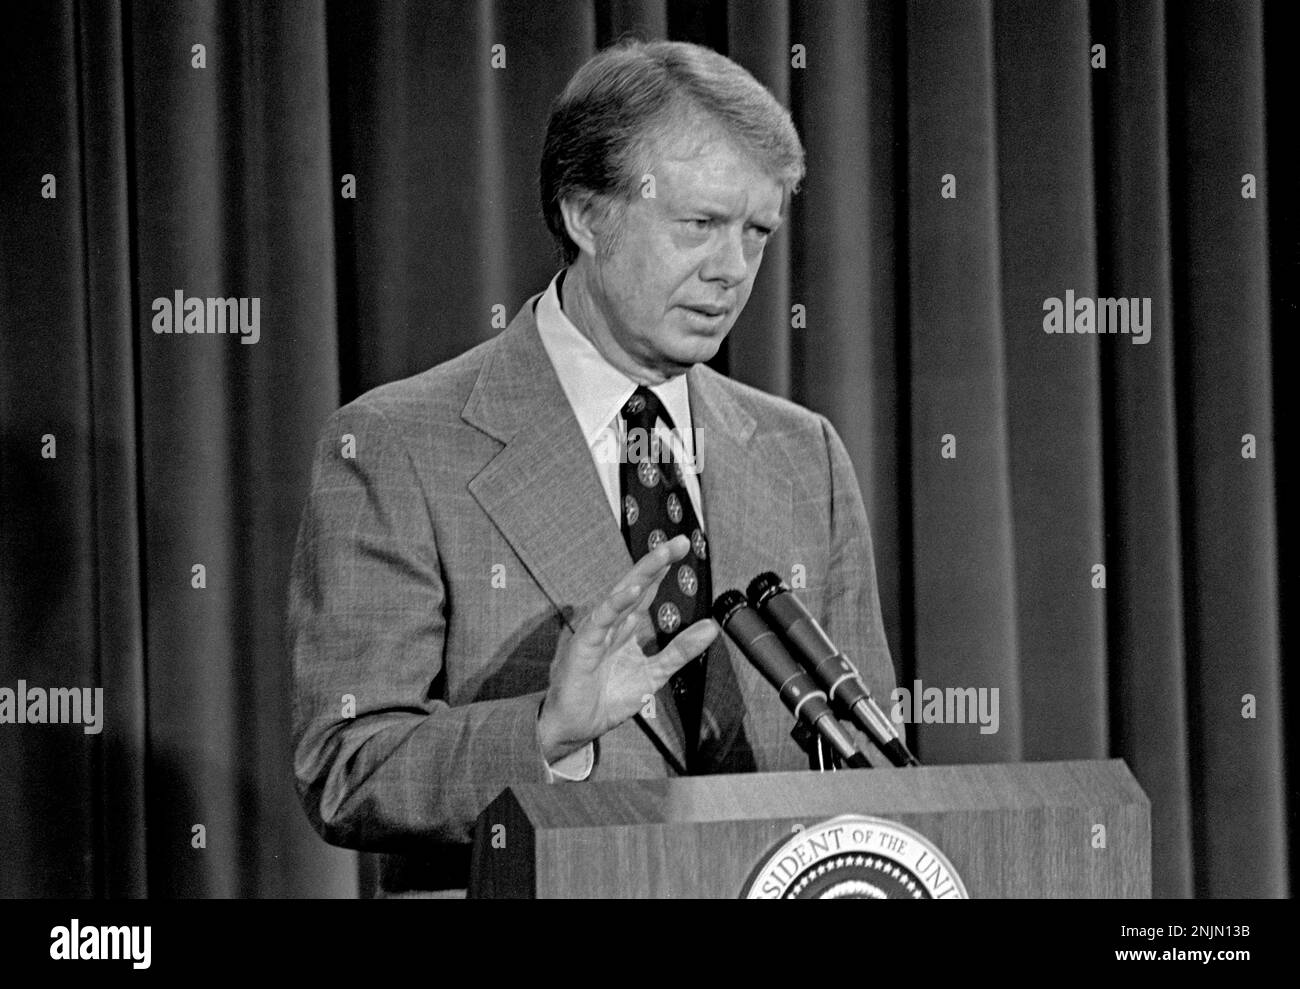 United States President Jimmy Carter conducts the first nationally televised press conference of his administration in the in the Old Executive Office Building on the White House campus in Washington, DC on February 8, 1977. Credit: Benjamin E. 'Gene' Forte/CNP Stock Photo